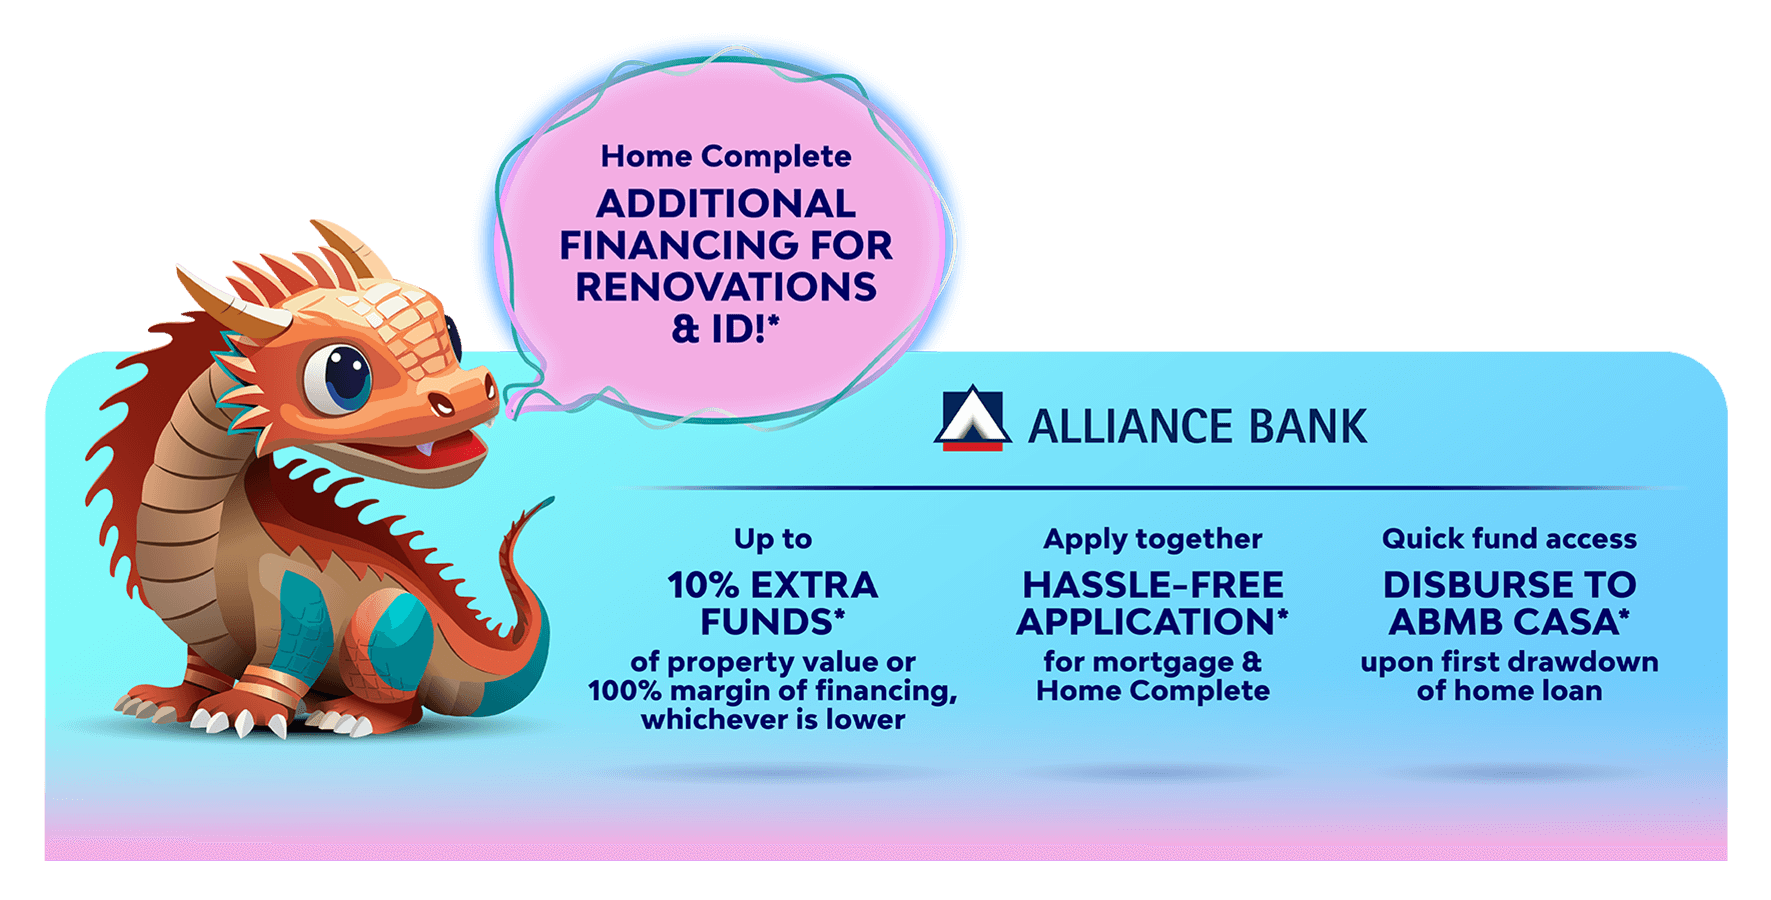 Additional Financing for renovations & ID!*